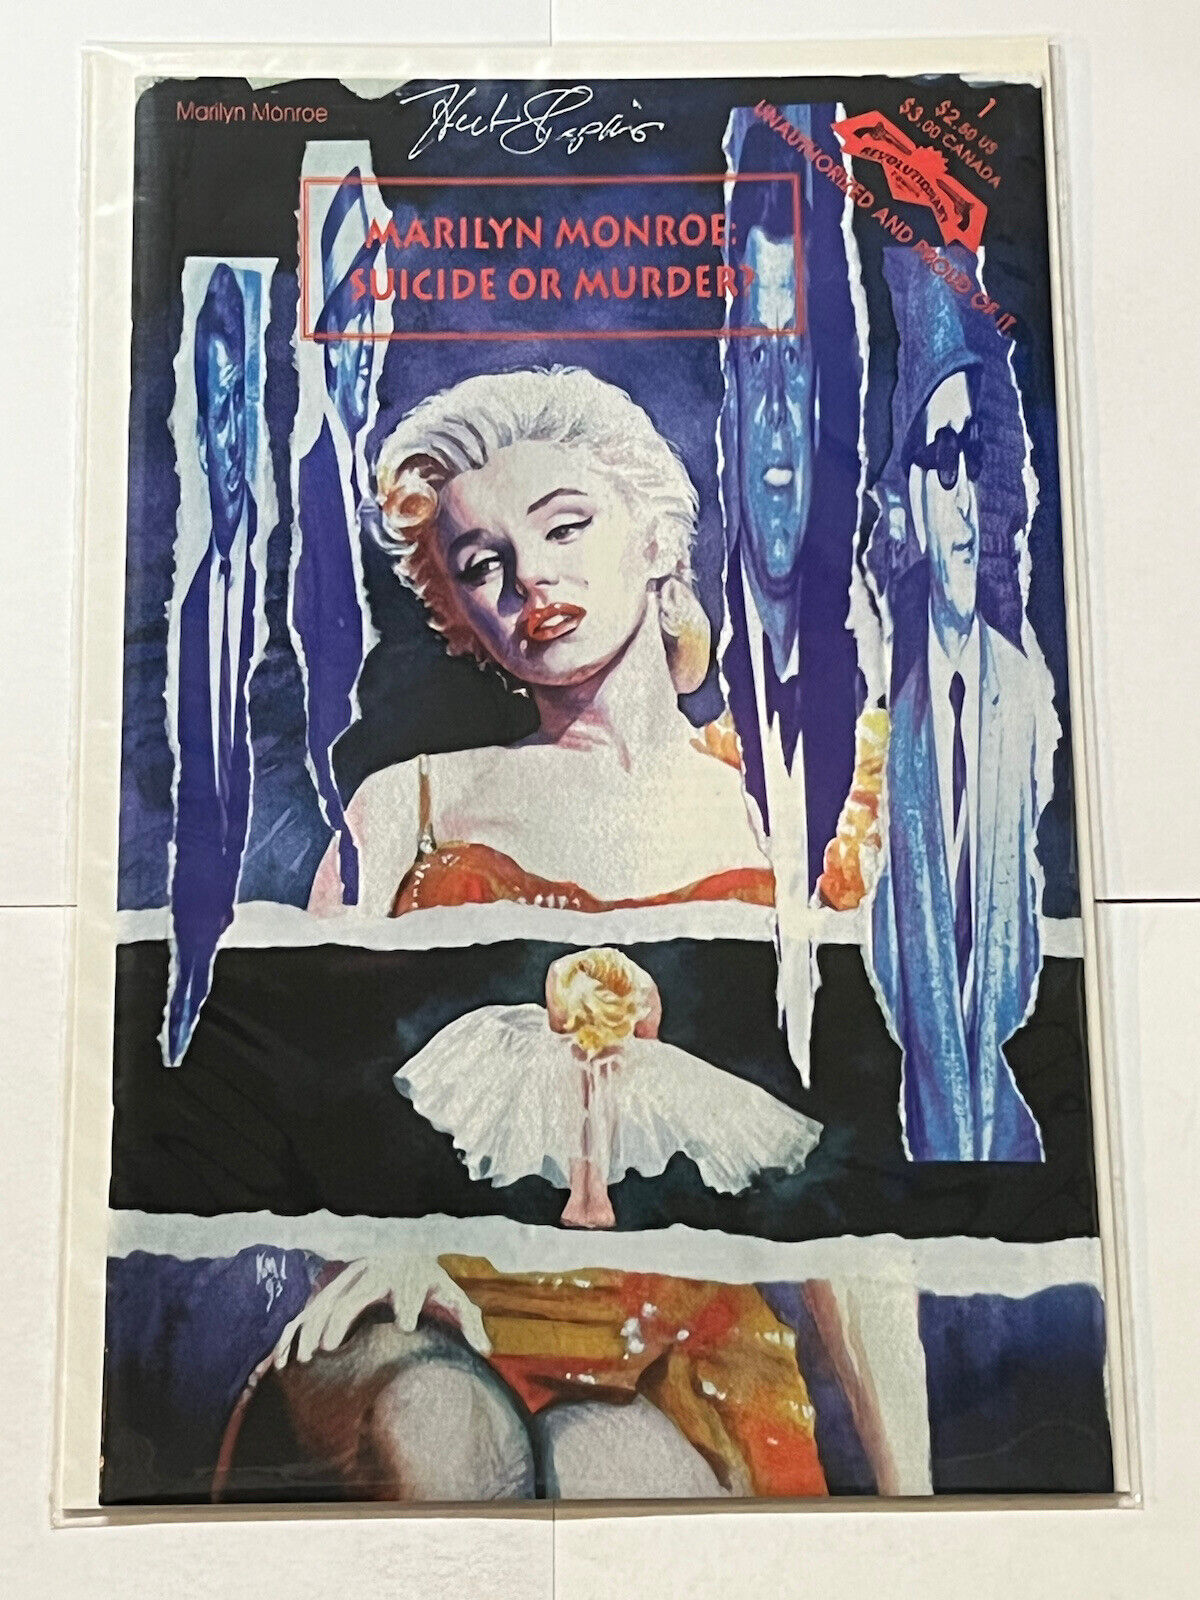 MARILYN MONROE: SUICIDE OR MURDER #1 AUTO Signed Herb Shapiro NM | Combined Ship